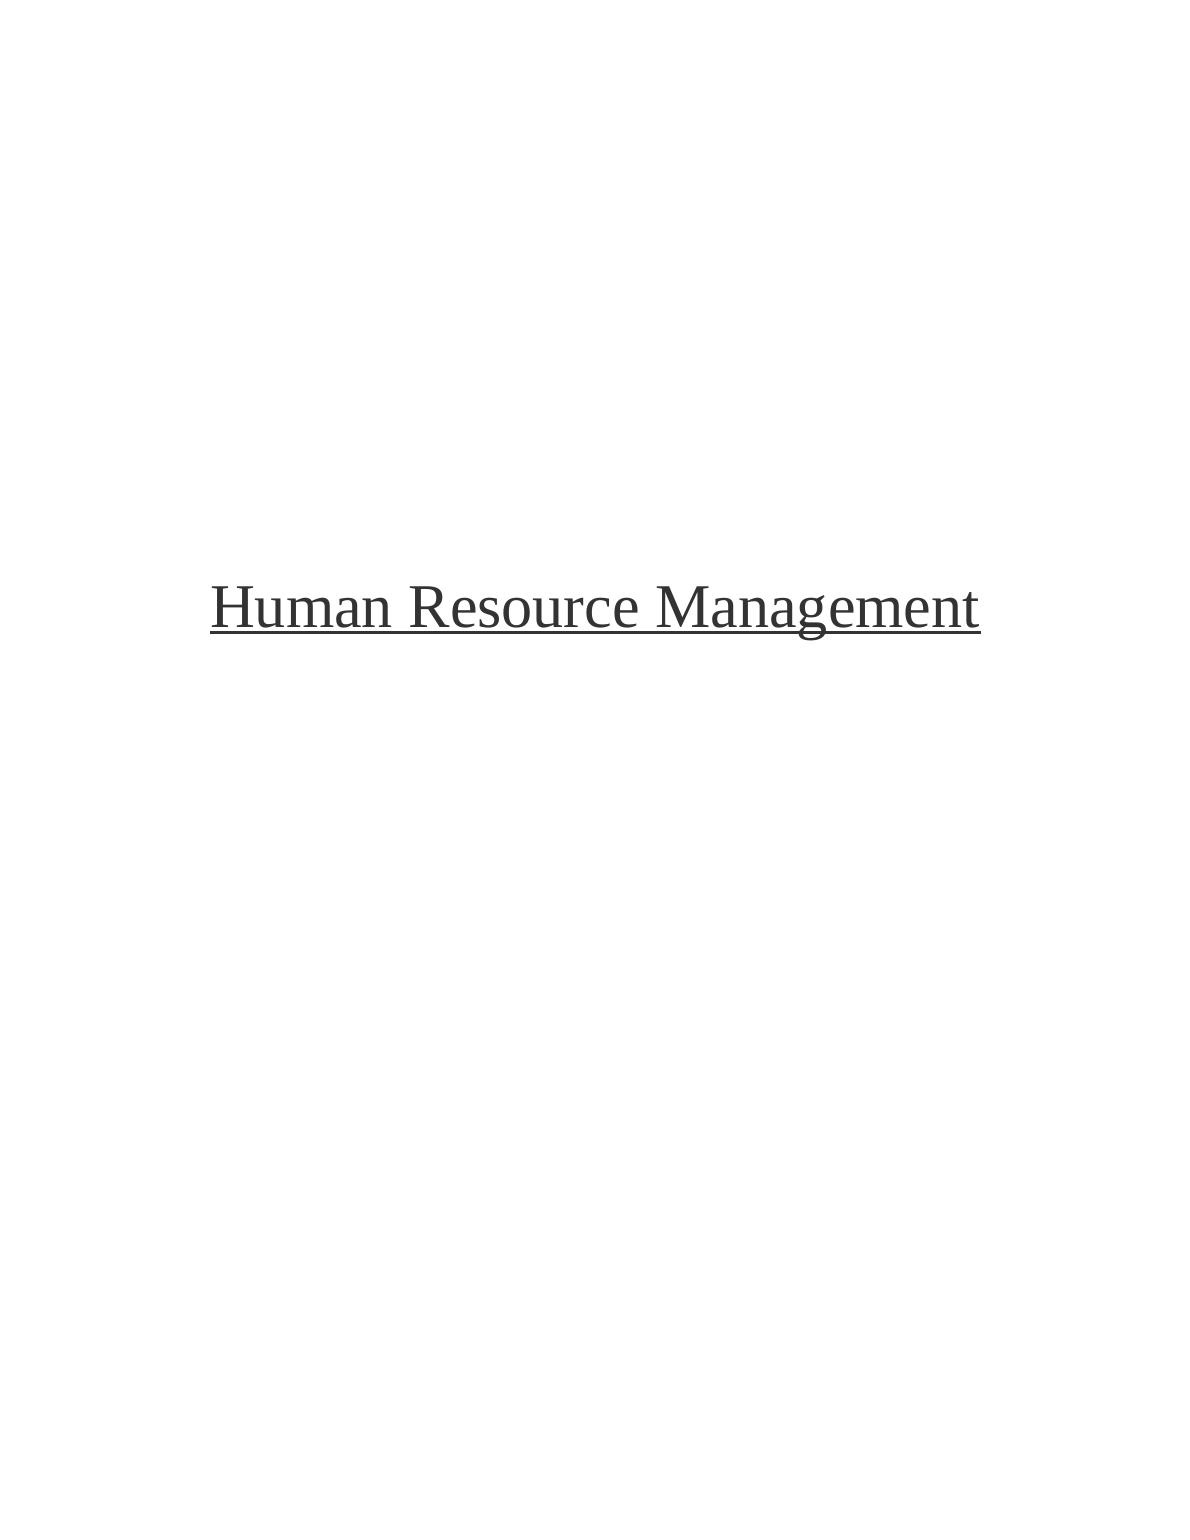 Human Resource Management Assignment : Woodhill College_1